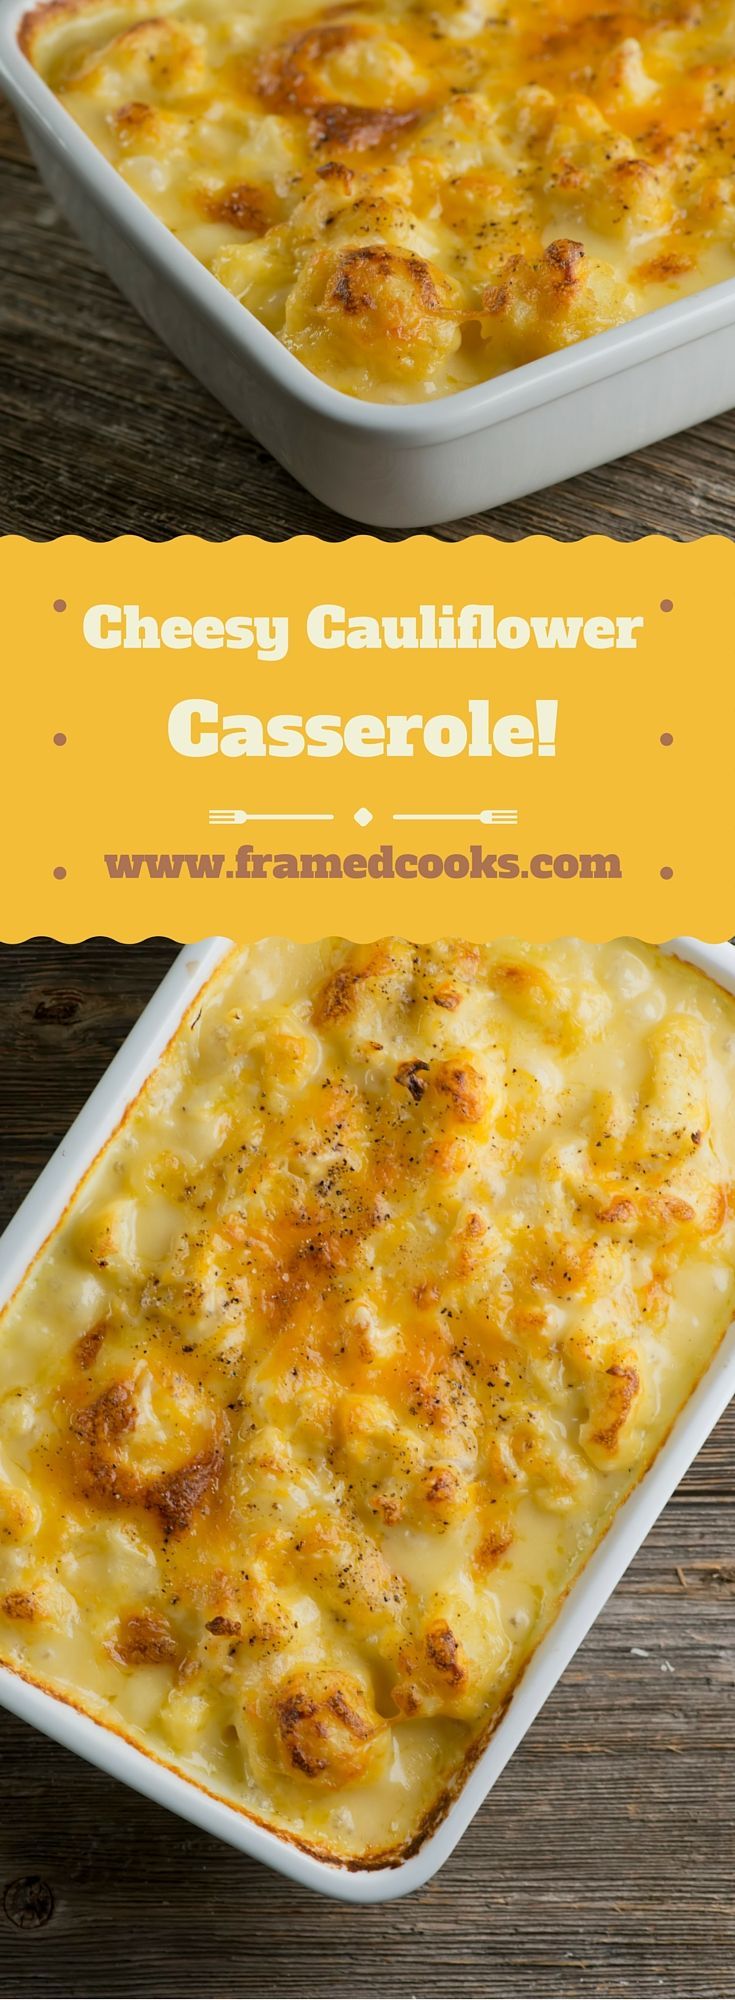 This easy and hearty recipe for cheesy cauliflower casserole will have everyone asking for a second serving of vegetables!